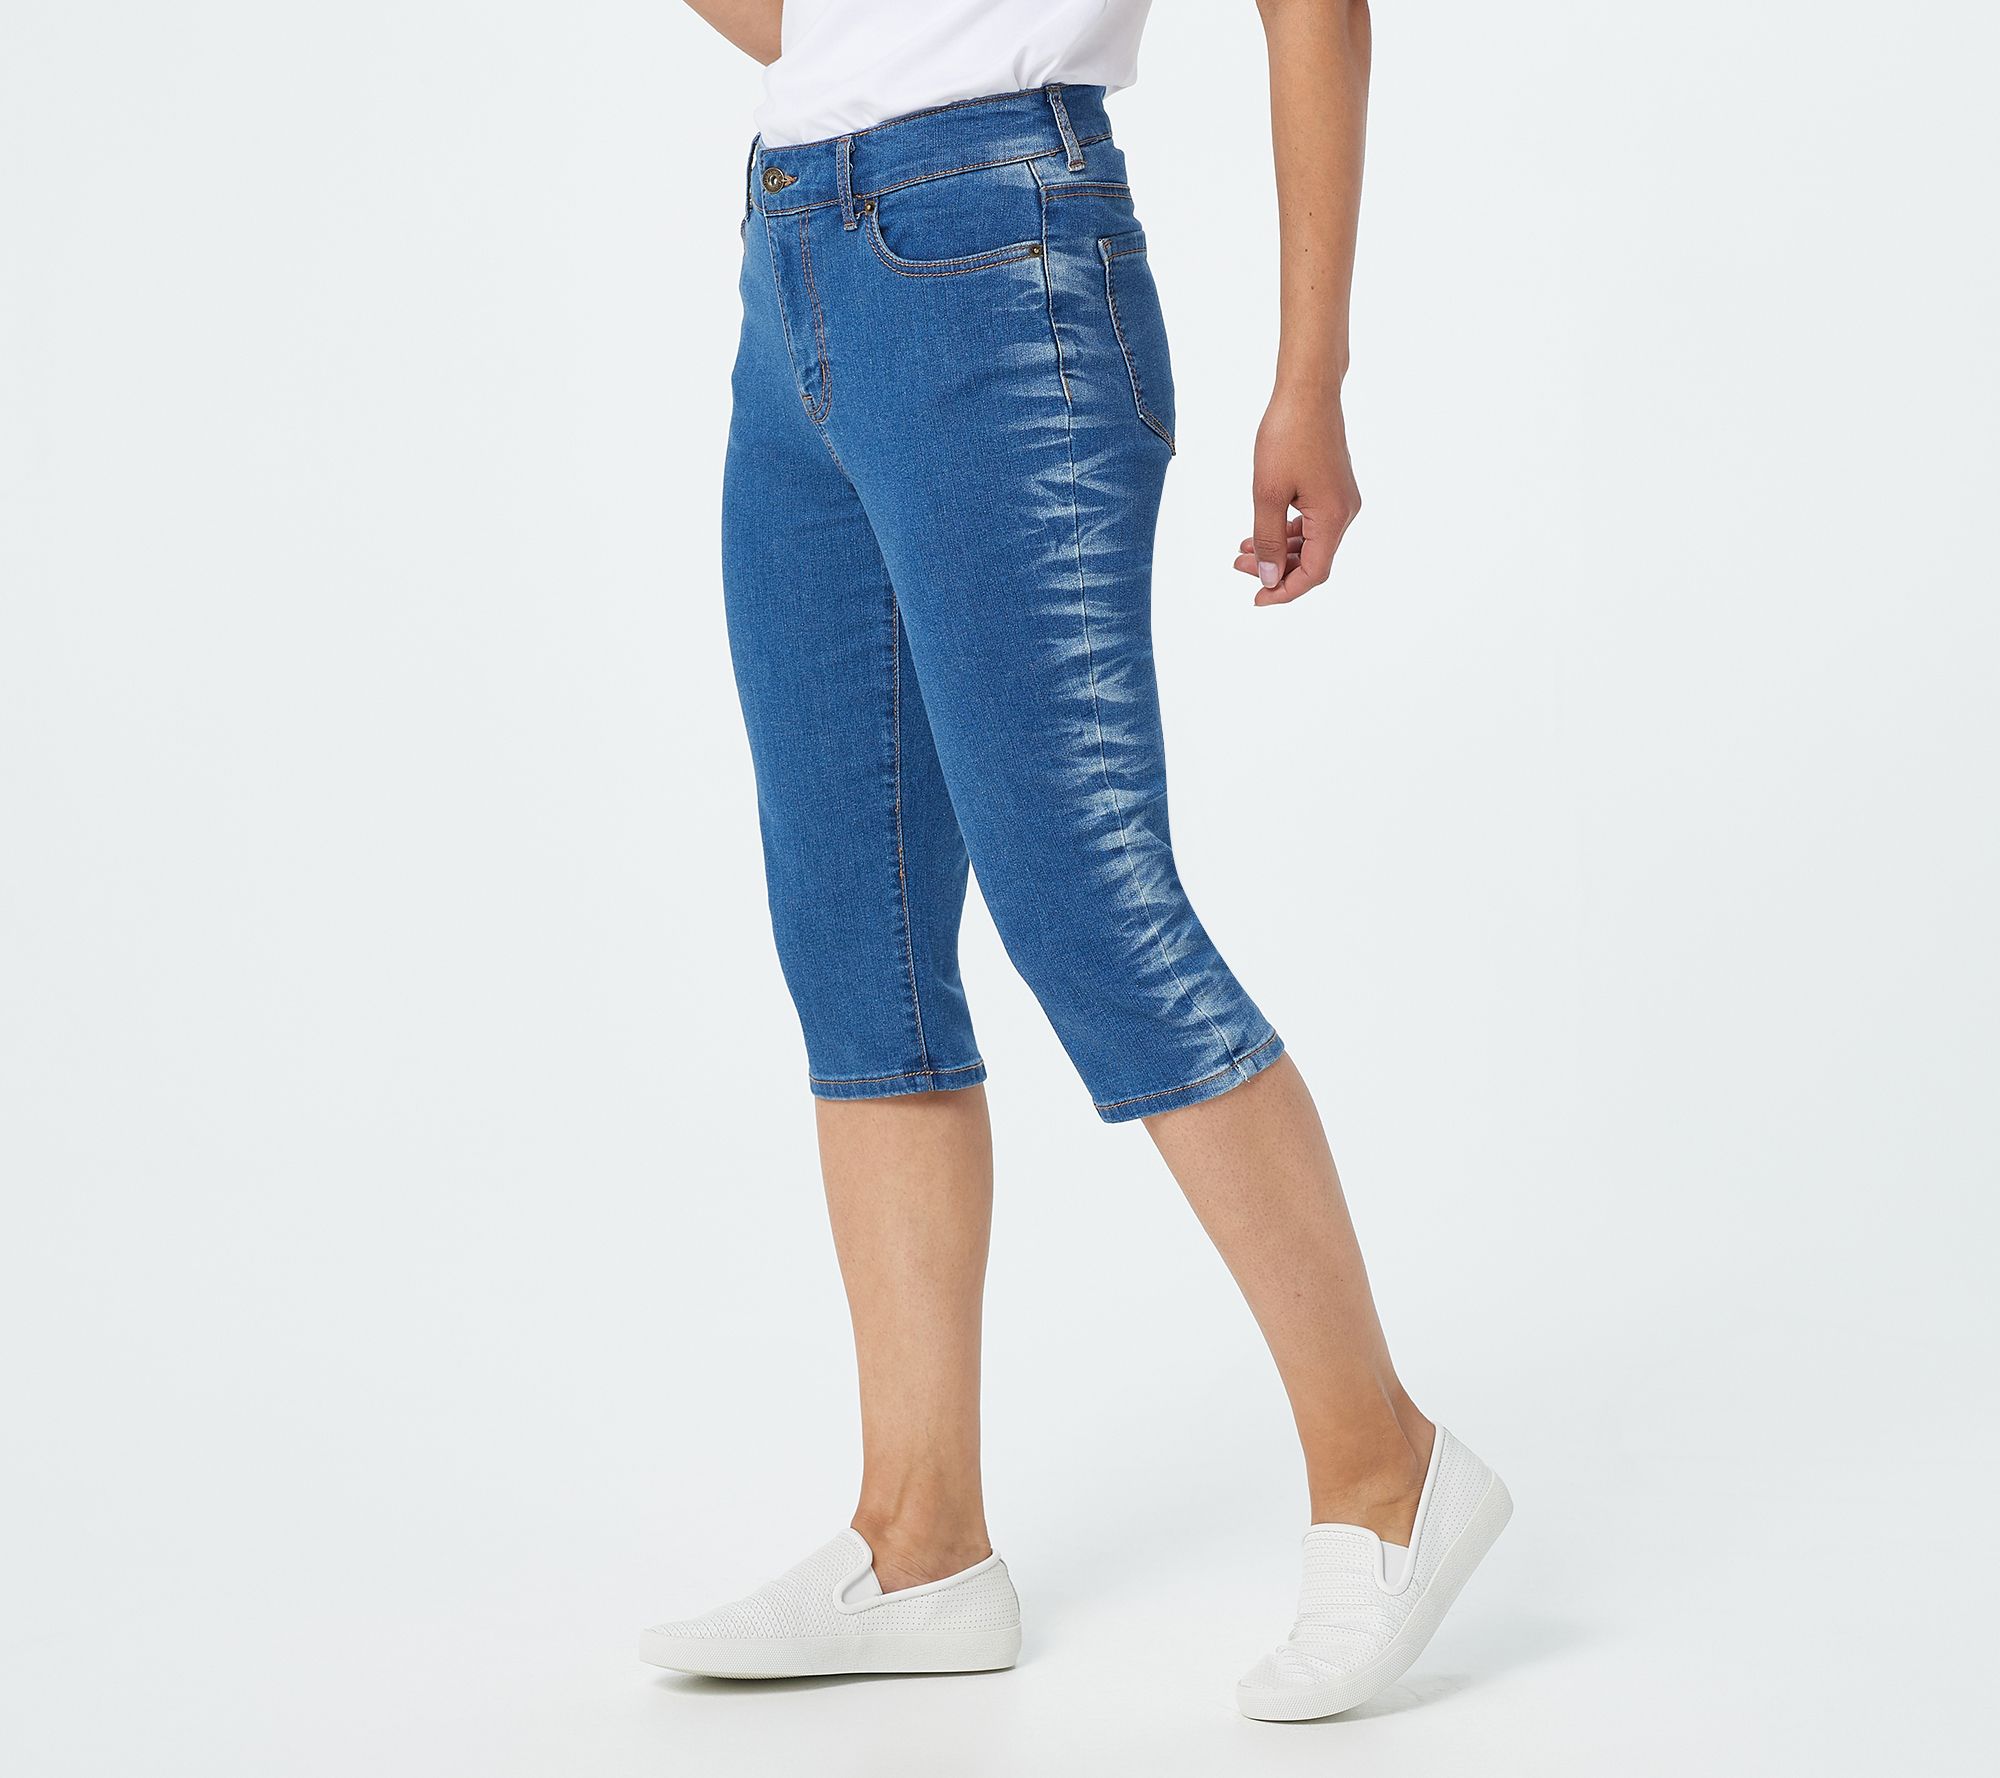 pedal pusher jeans